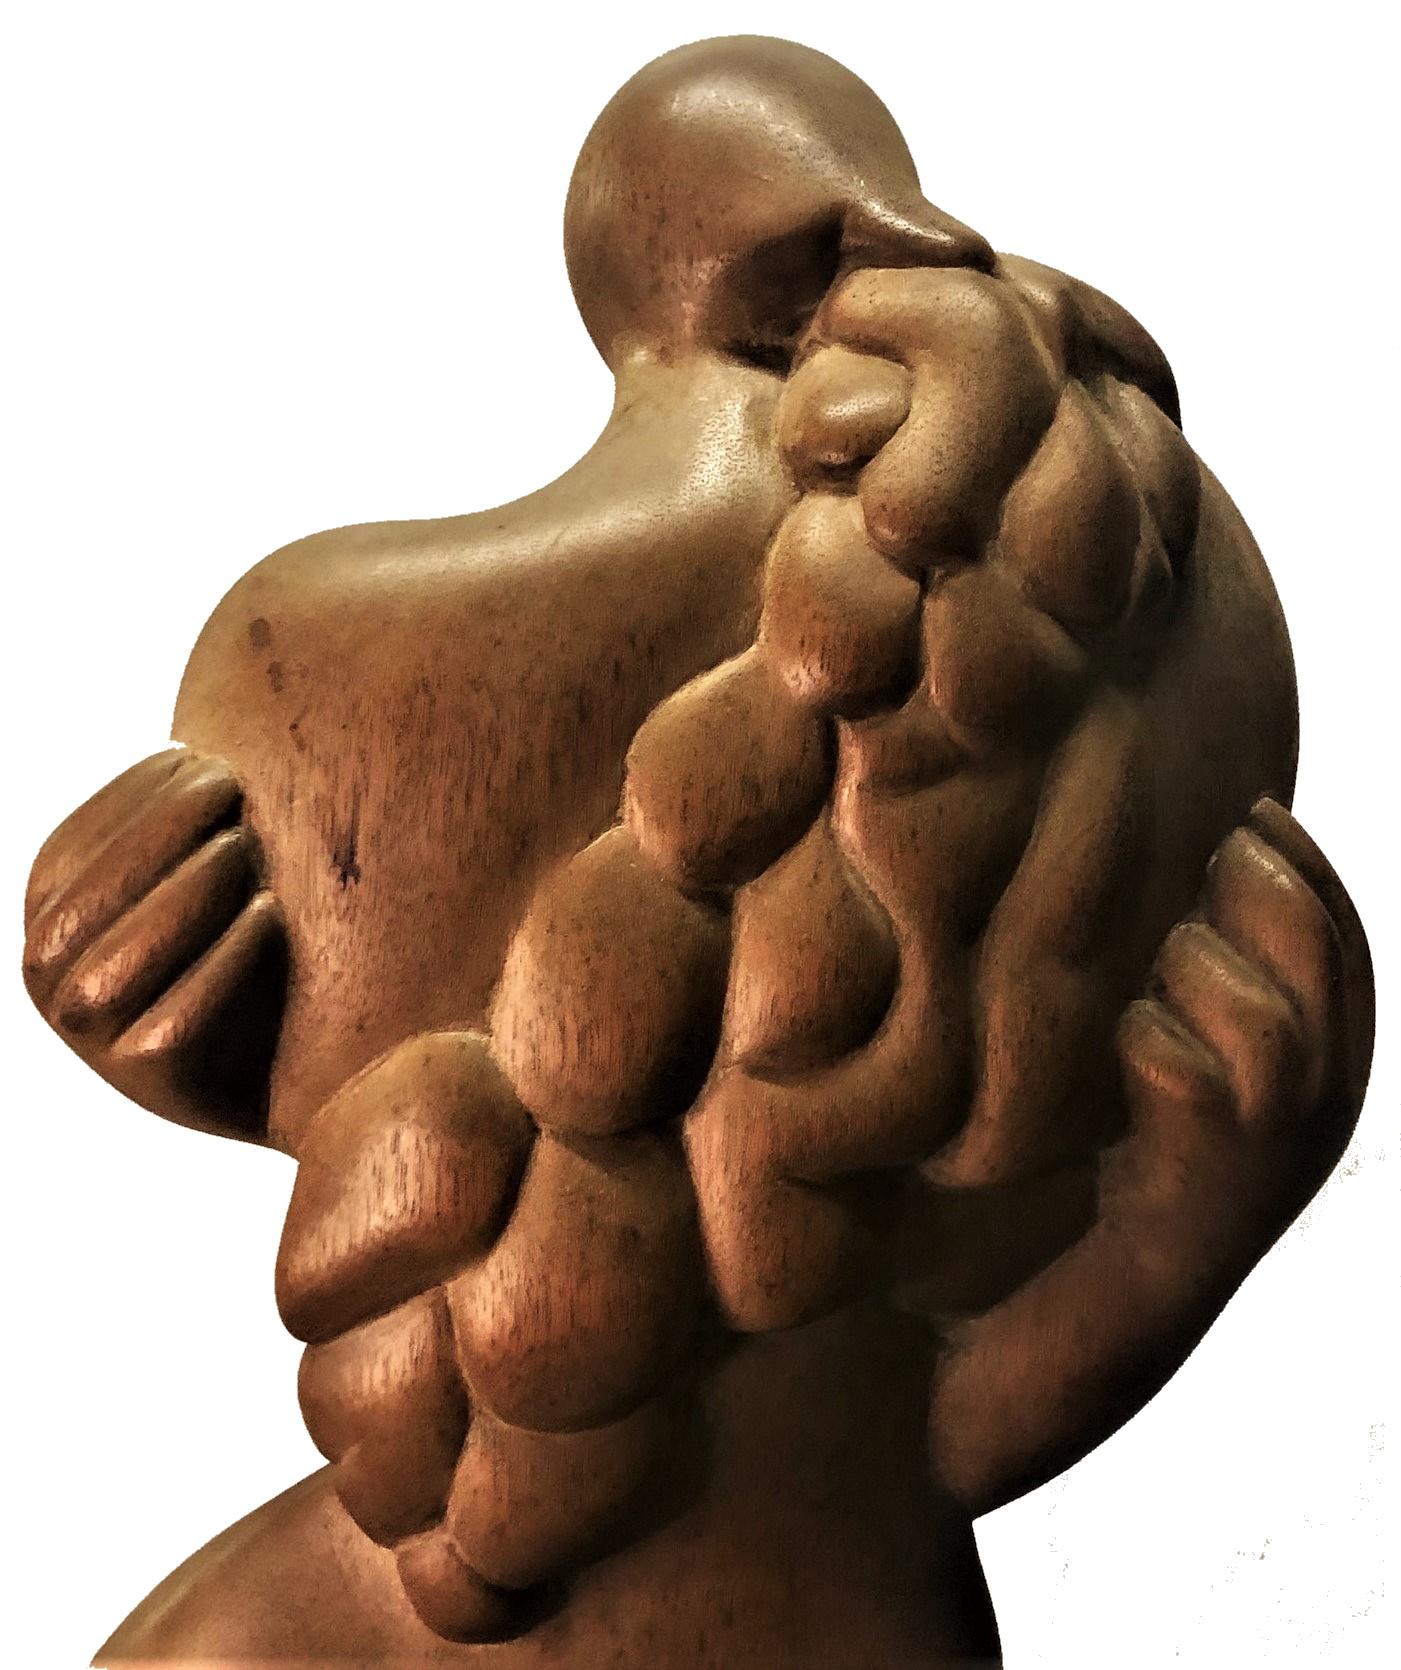 Self-Embrace, Mid-Century American Modern Wood Sculpture by Needle, Ca. 1960 For Sale 2